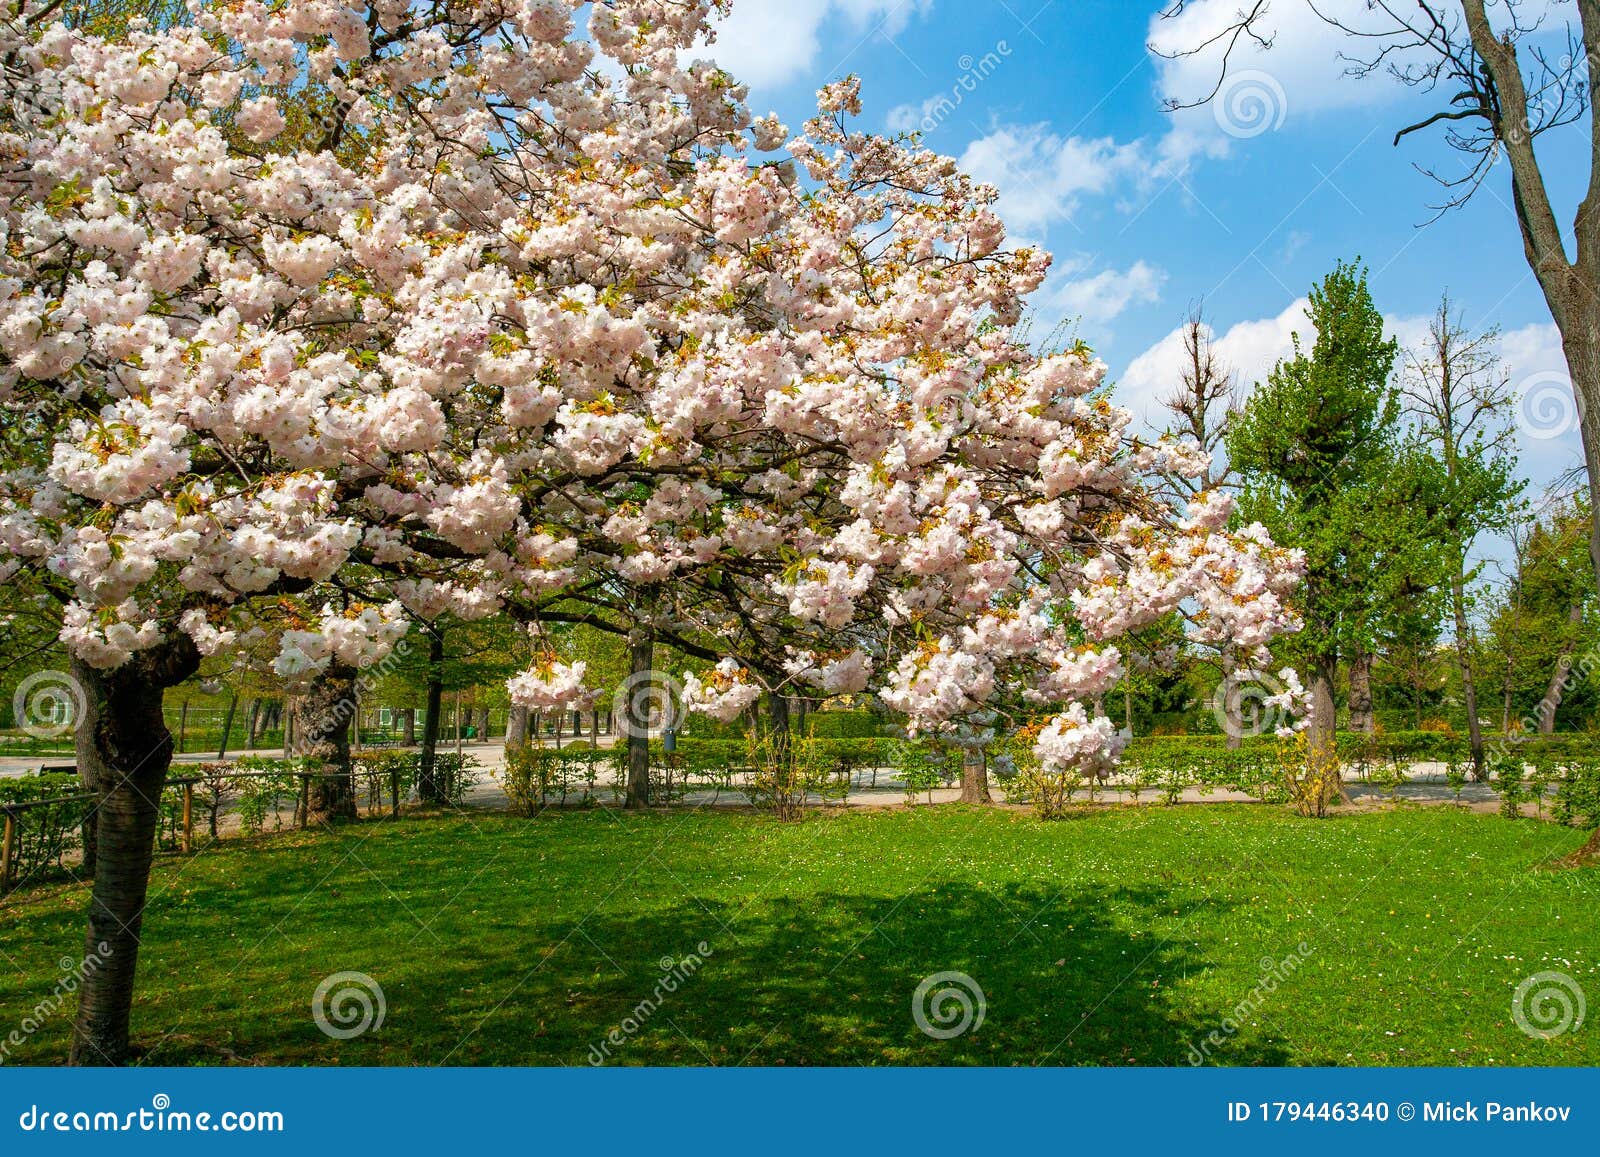 Blossom Tree with Delicate Flowers in Park Stock Photo - Image of ...